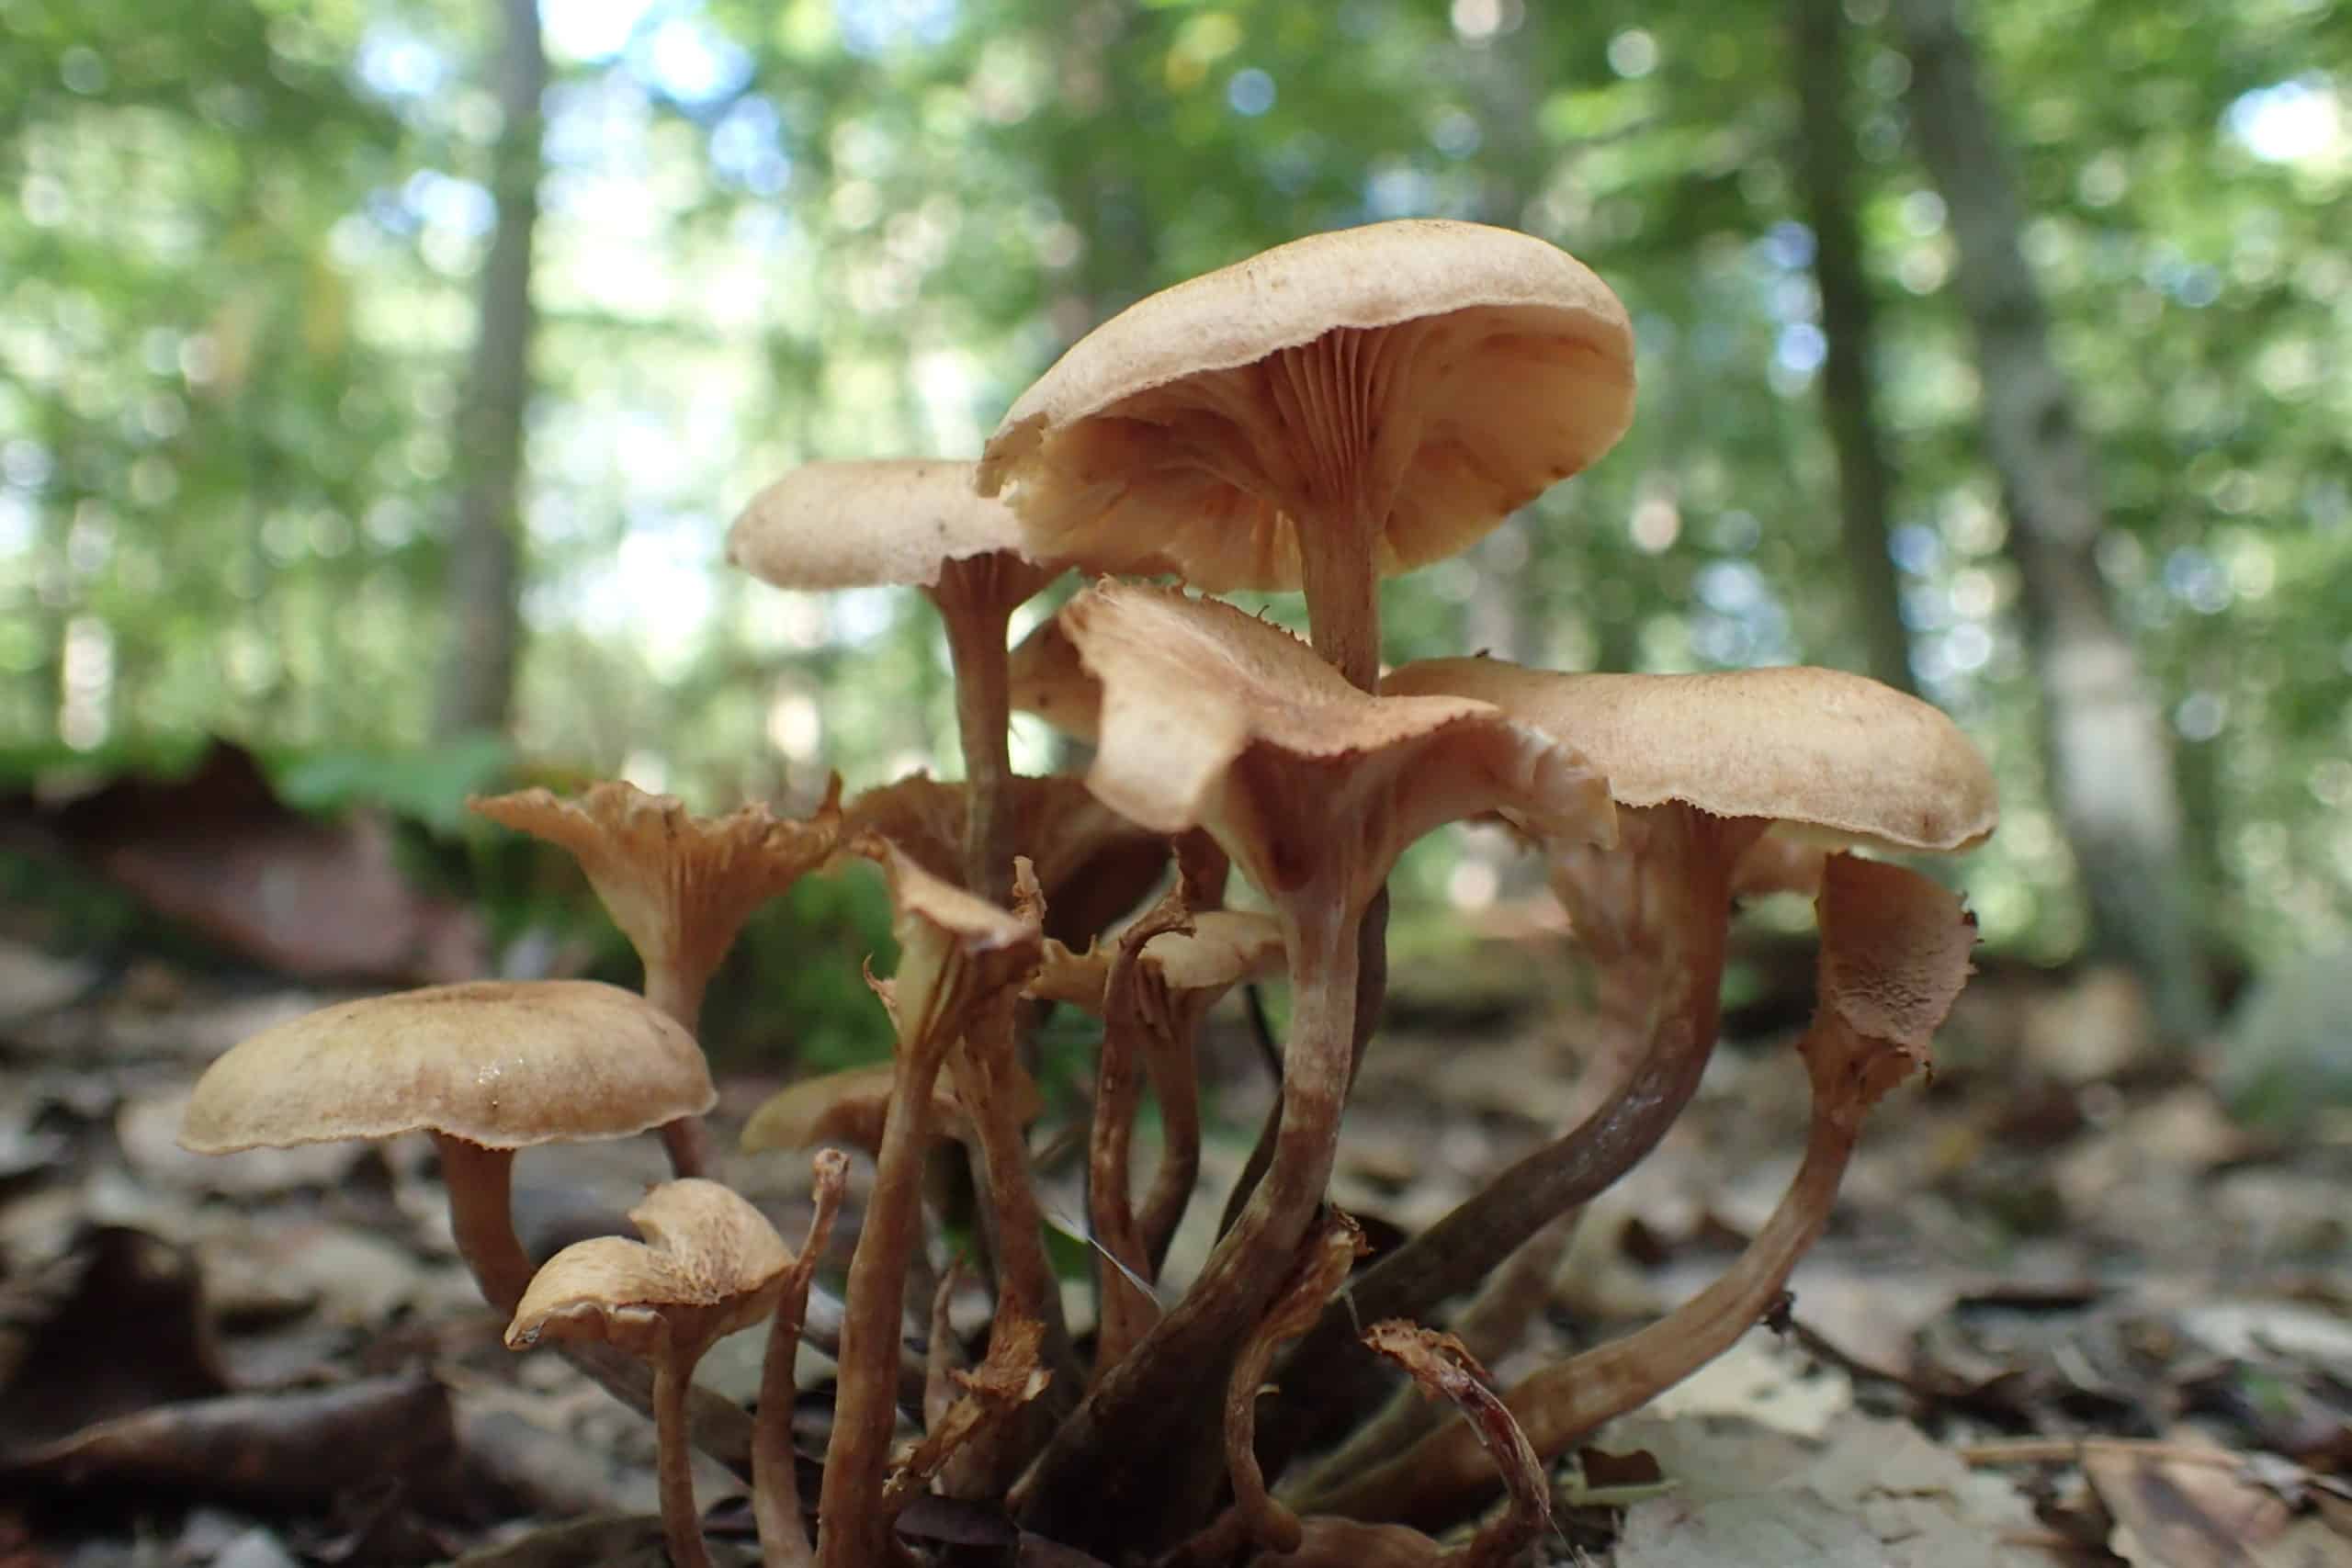 Small cluster of brown capped mushrooms stand before the green leaves of tall forest trees